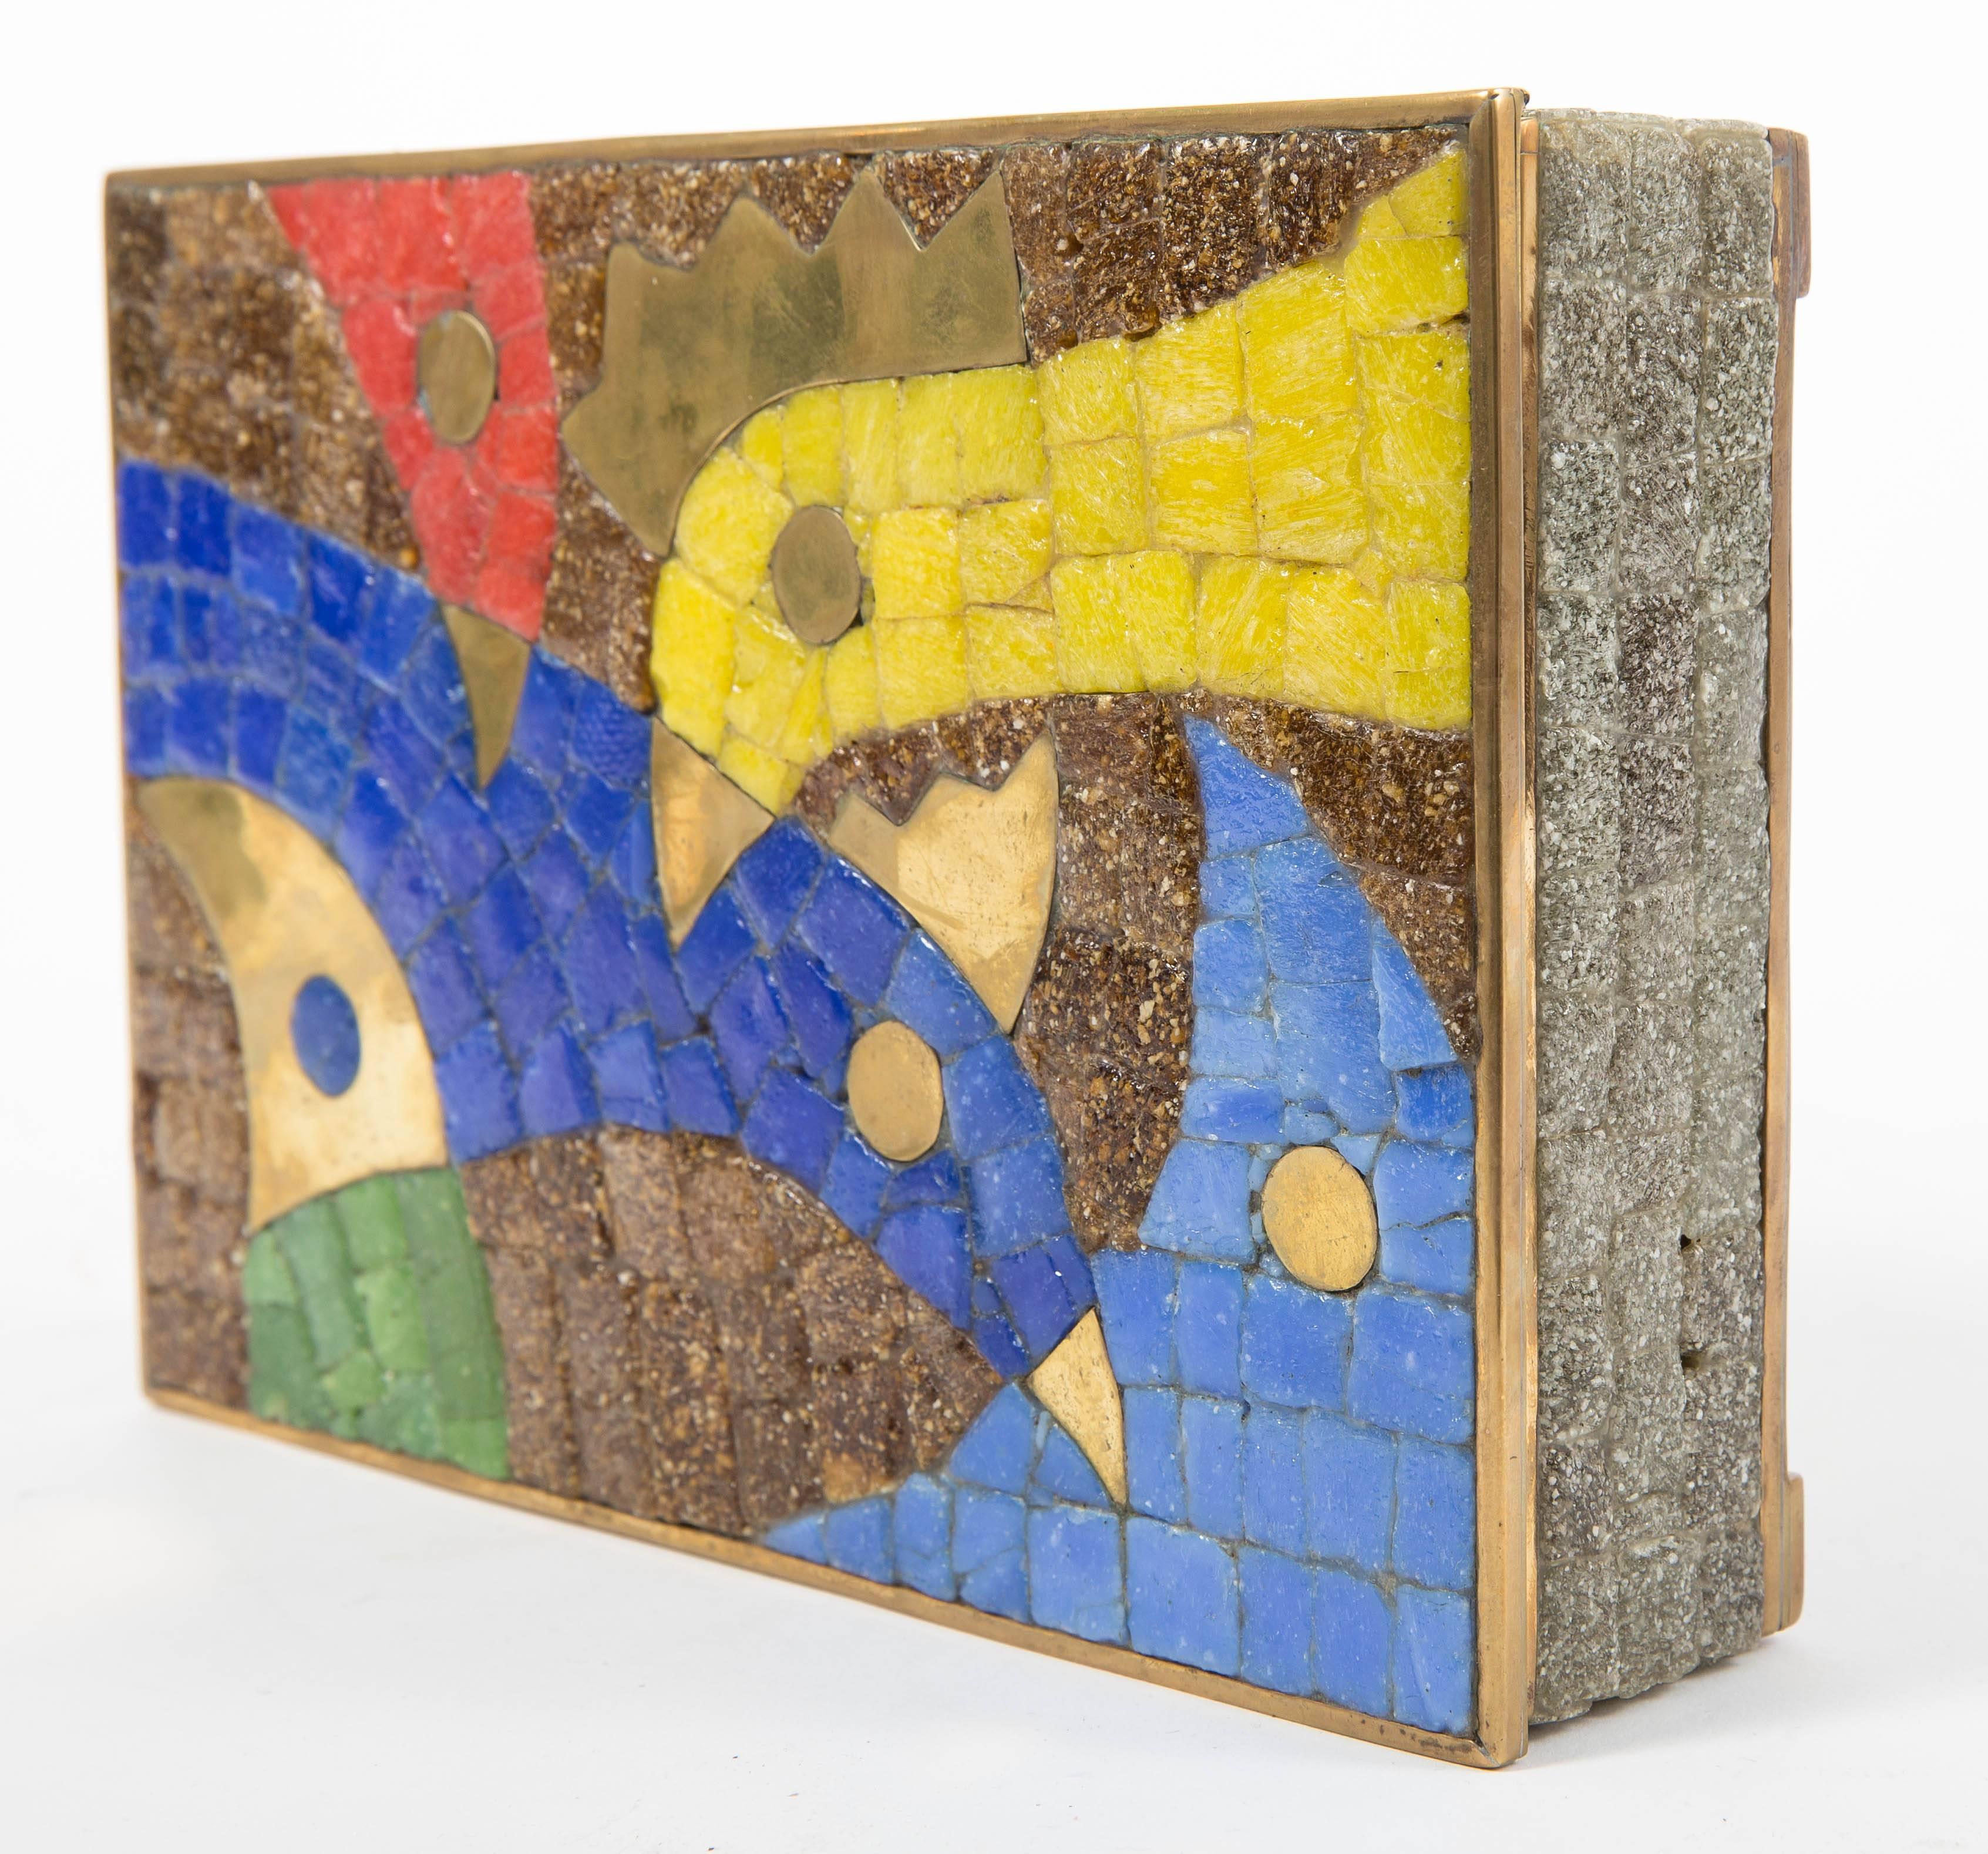 Brass Box with Colorful Inlaid Stone Bird Mosaic by Salvador Teran 1